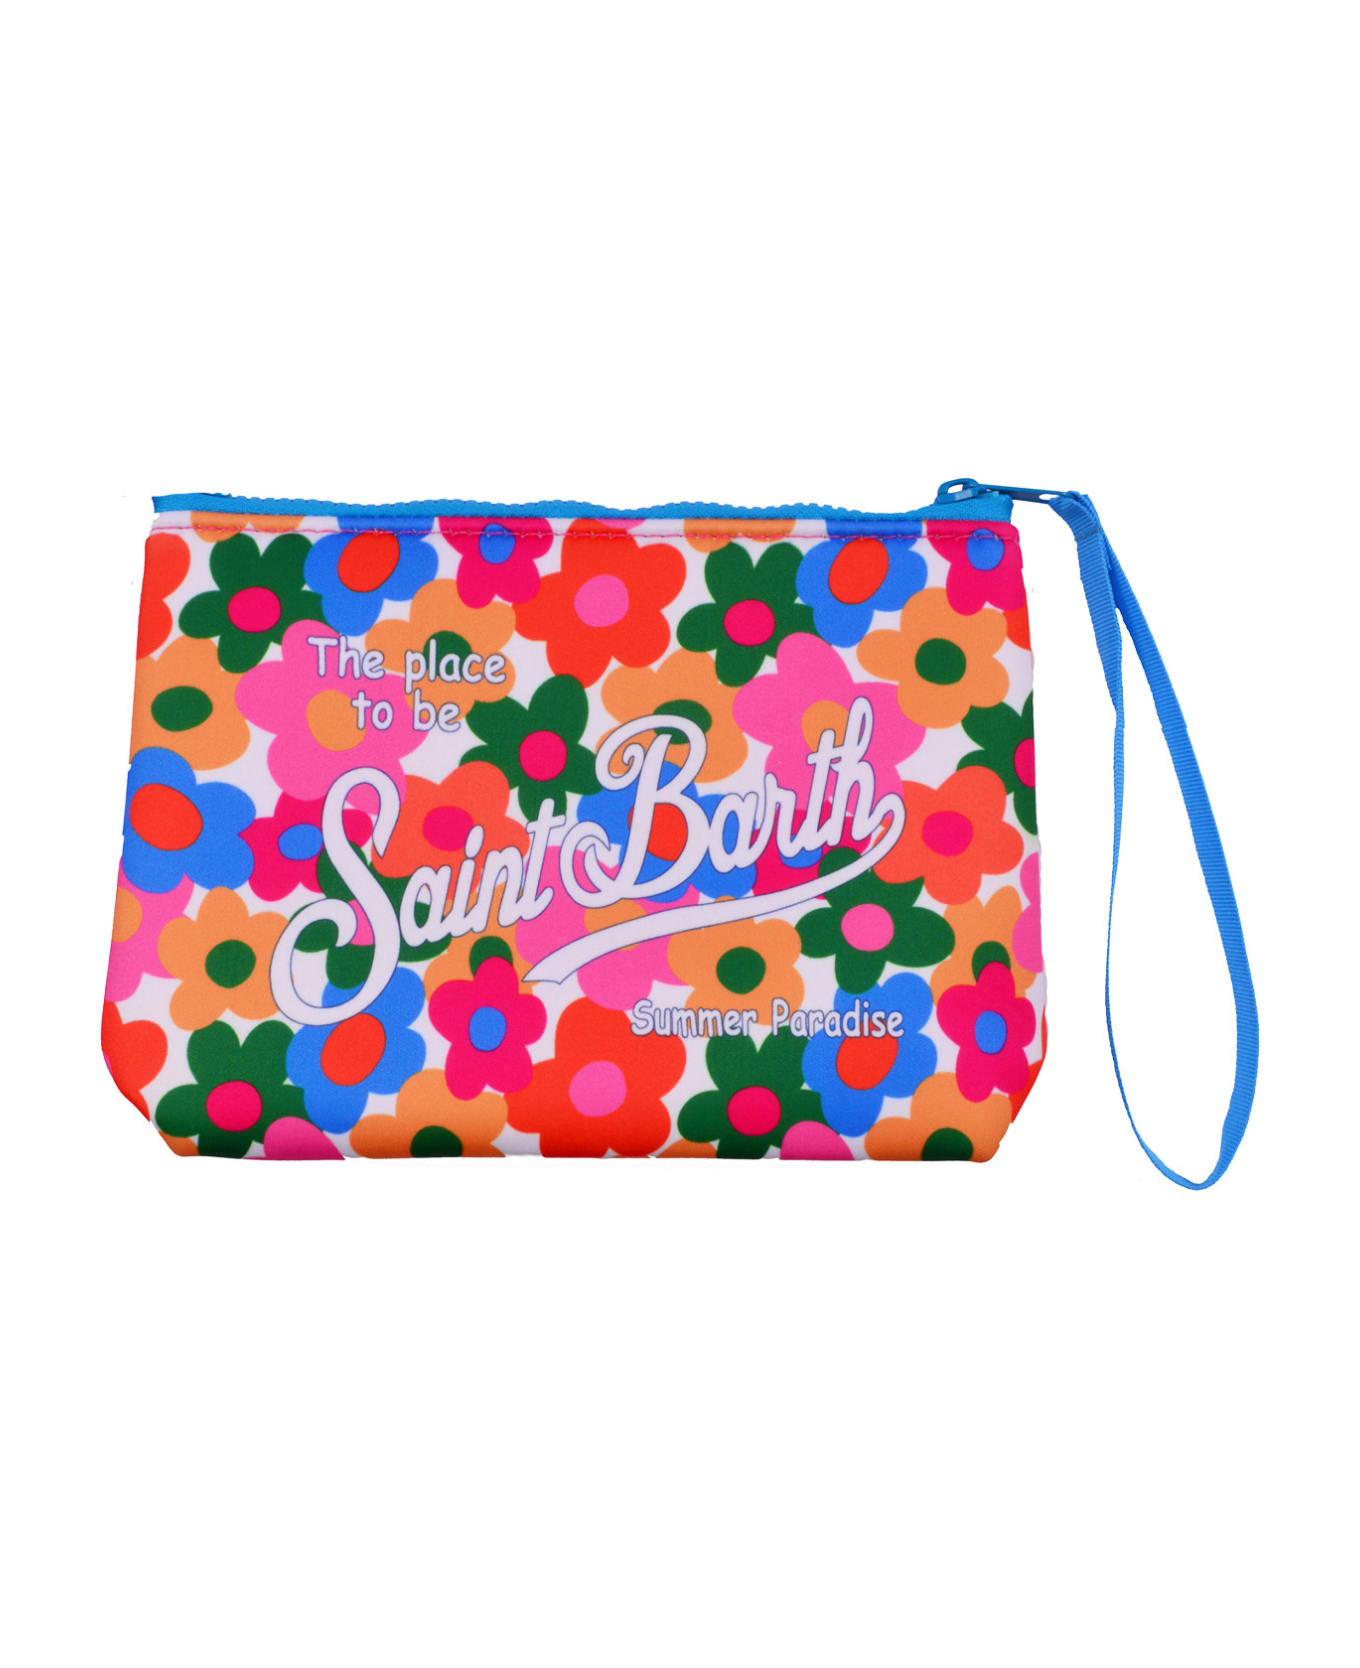 MC2 Saint Barth Clutch With Print - Multicolor アクセサリー＆ギフト